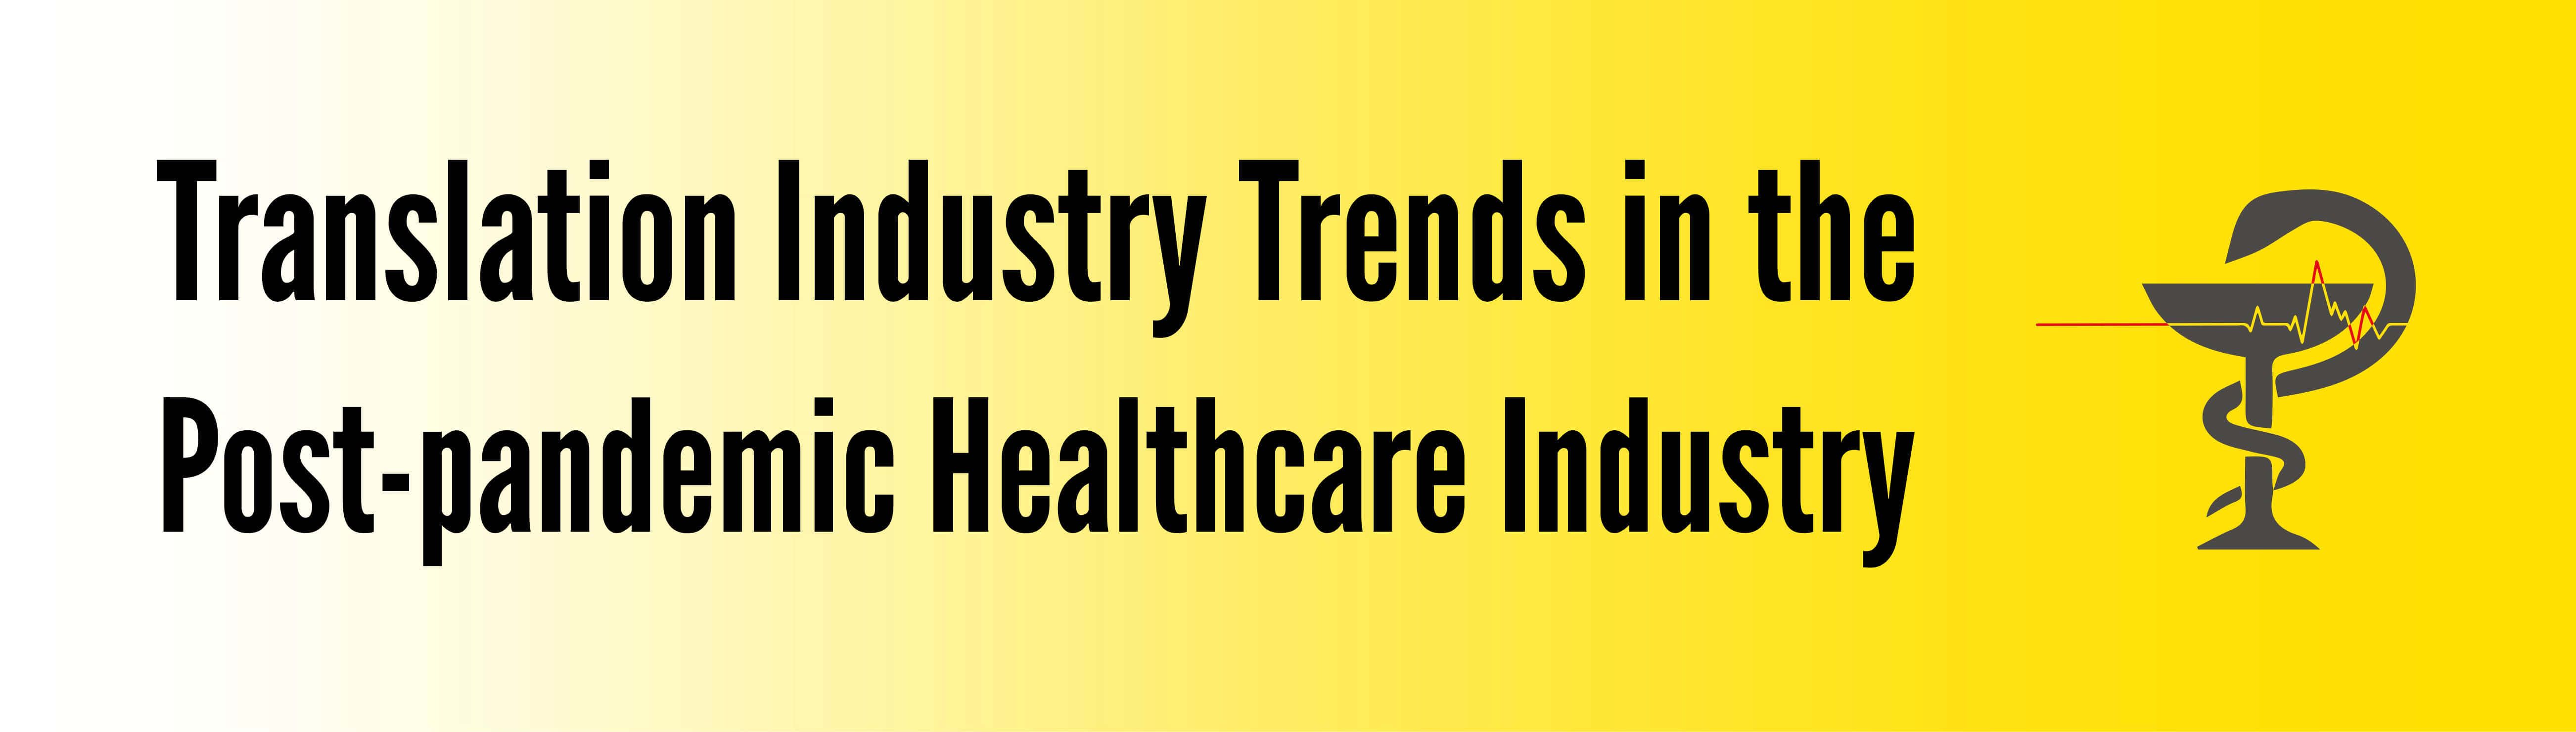 Translation Industry Trends  in the Post-pandemic Healthcare Industry